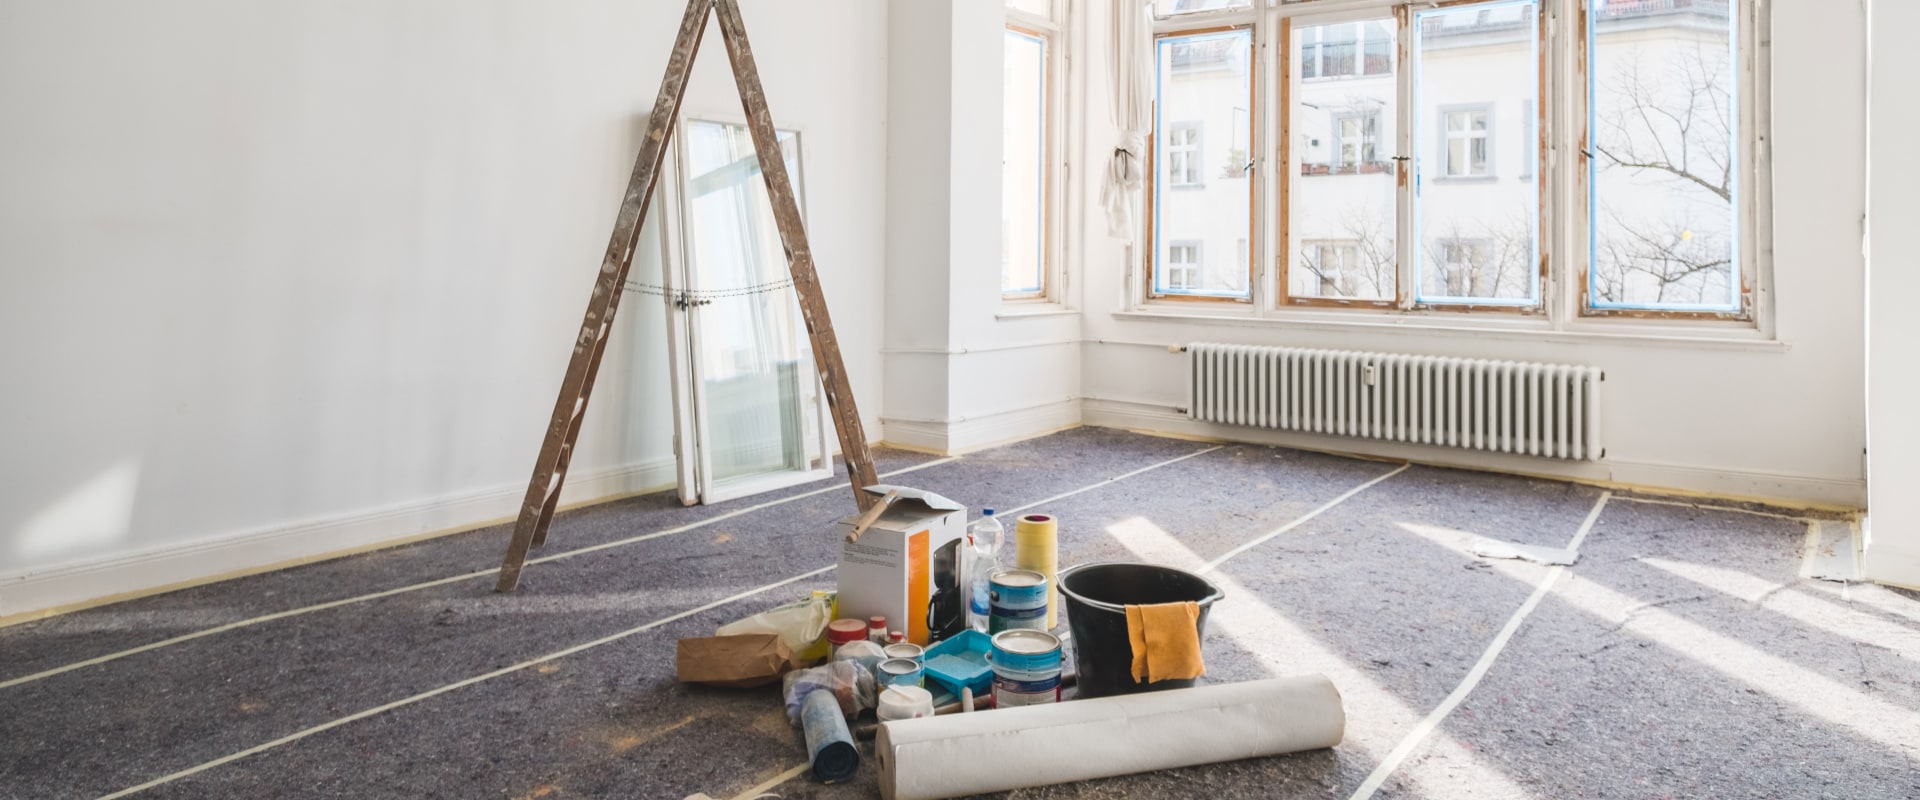 Can i live in my home during renovation?